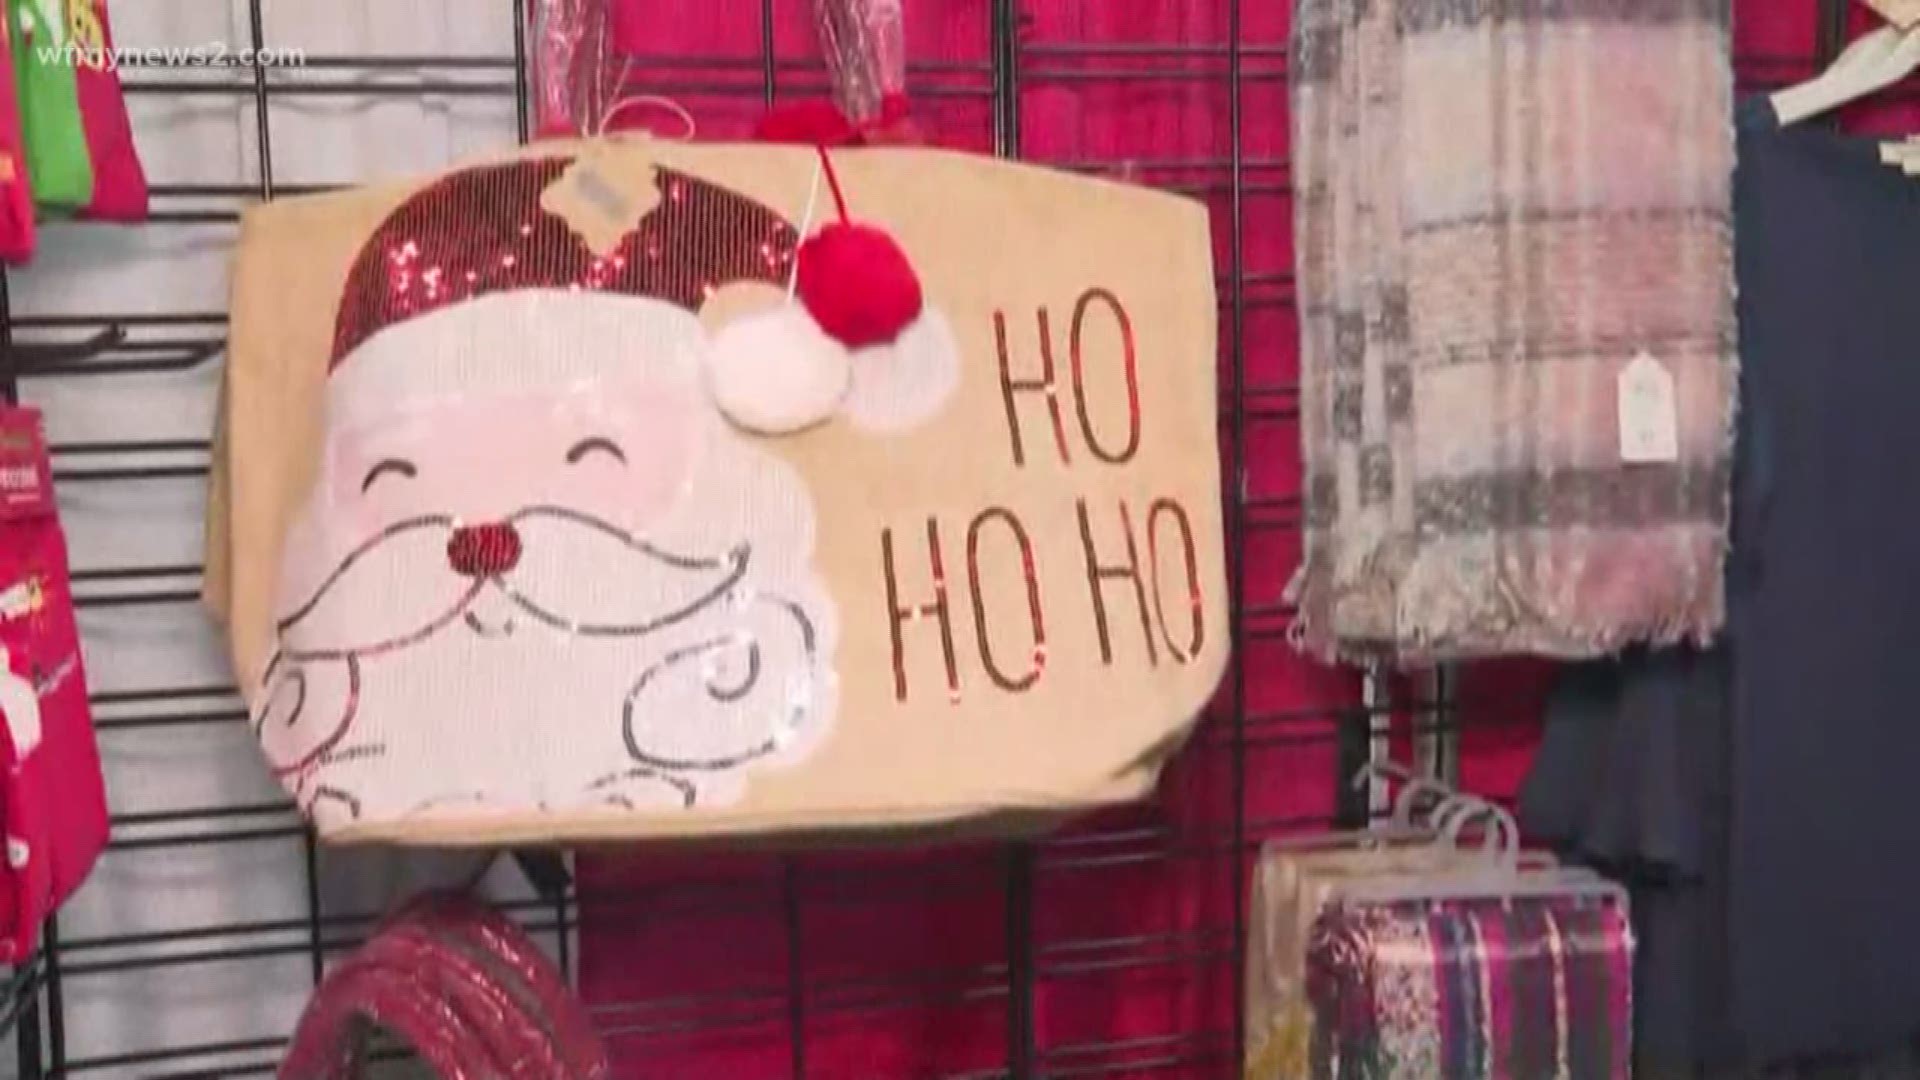 The Annual Holiday Market is filled with food, drinks, holiday gifts and decorations and more.